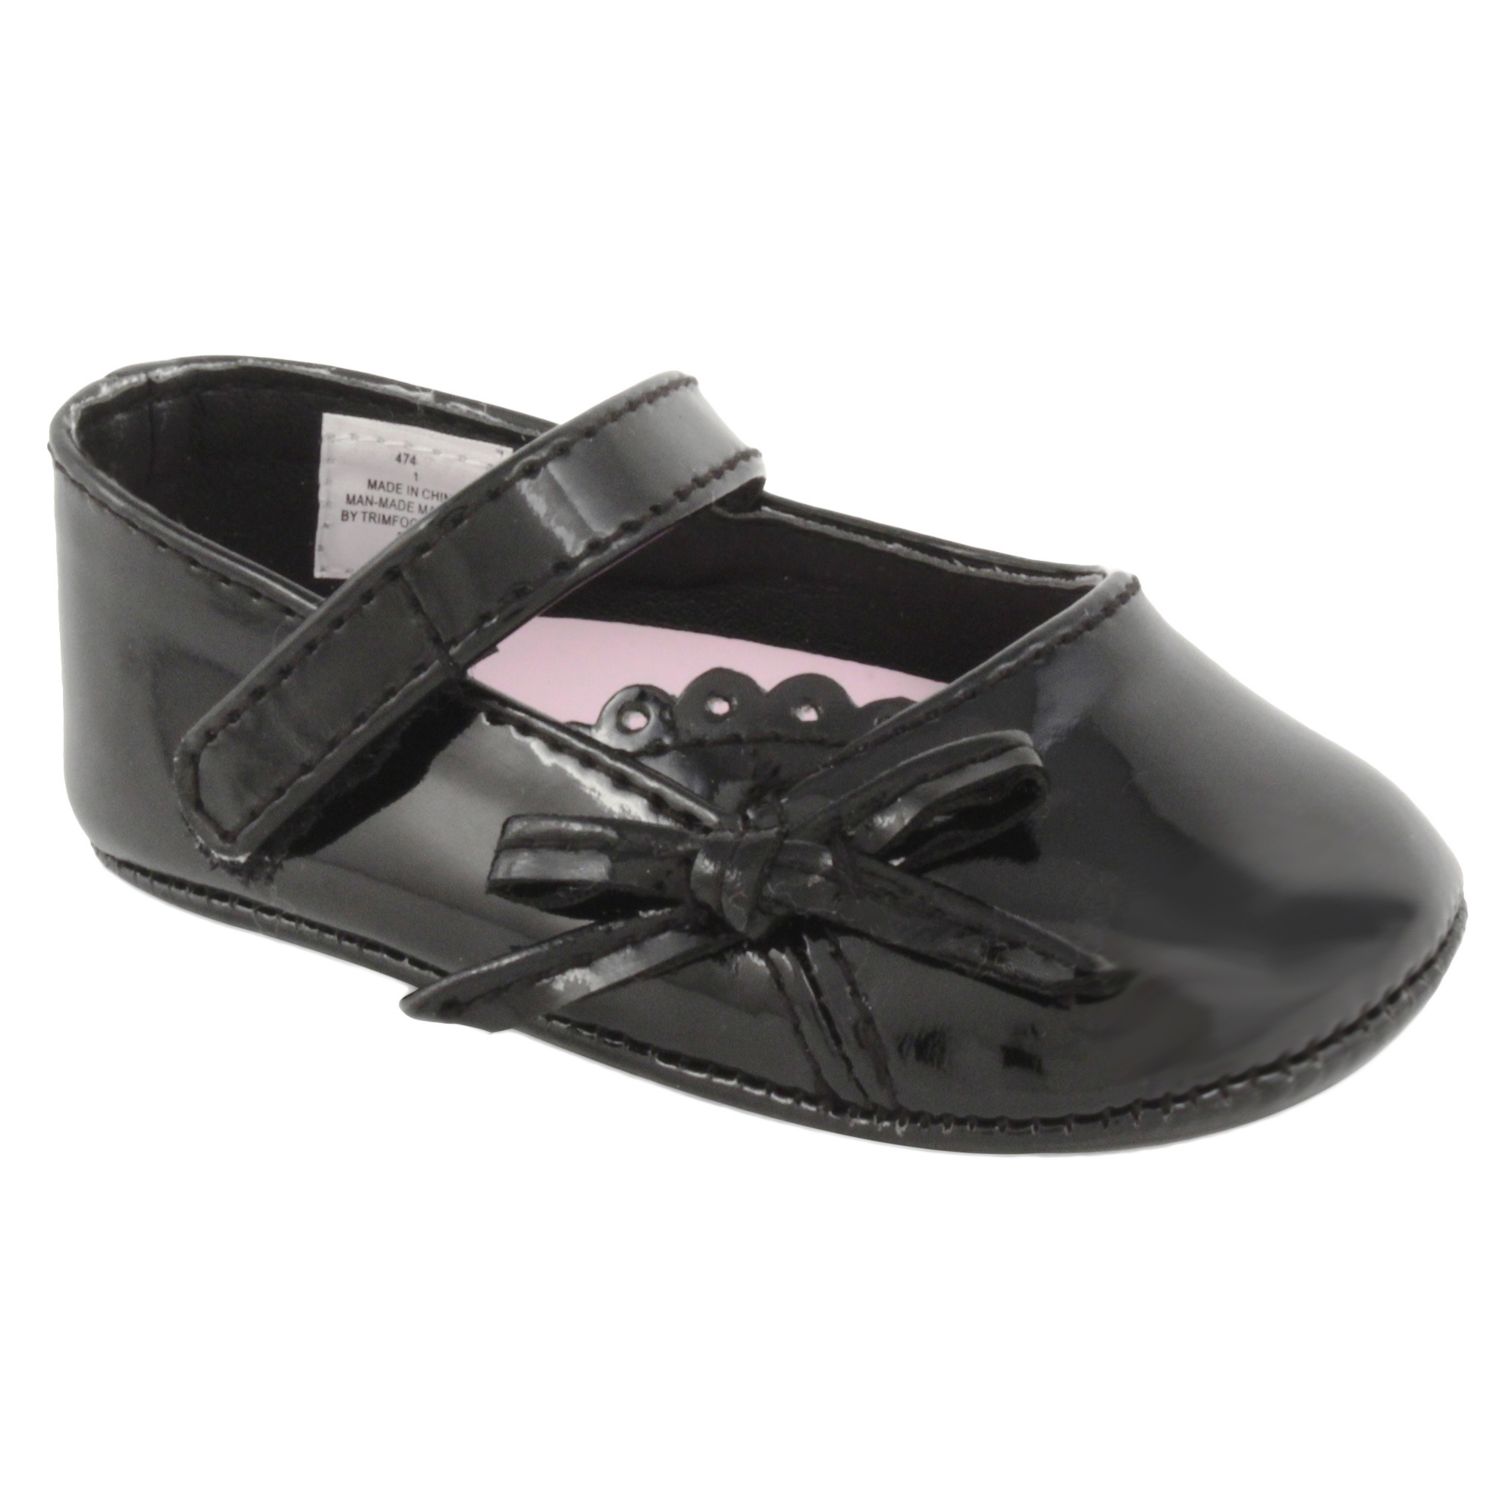 black patent leather baby girl shoes